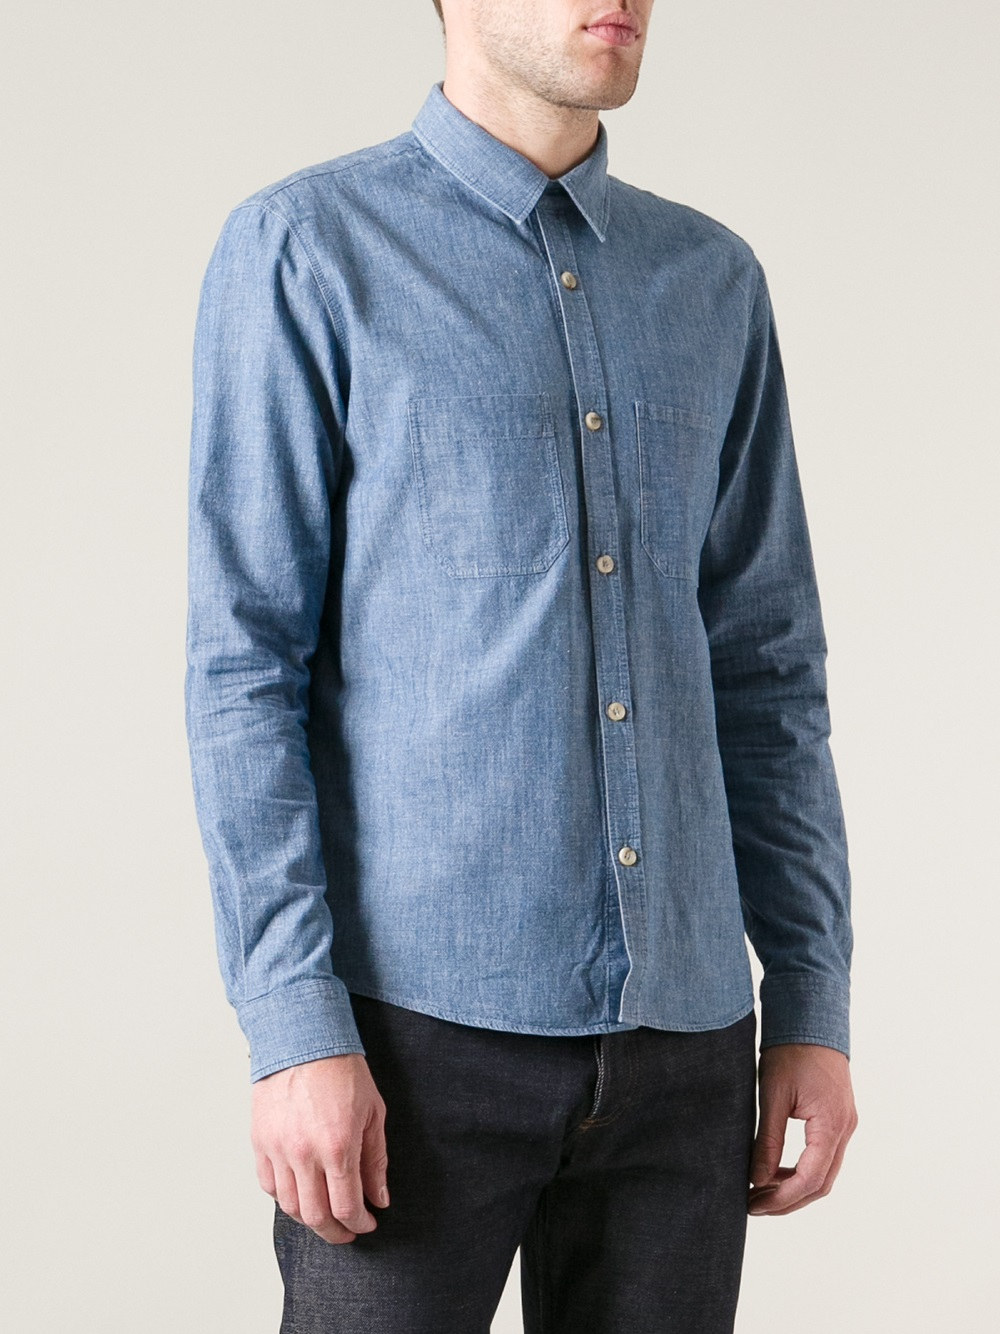 A.P.C. Chambray Work Shirt in Blue for Men - Lyst